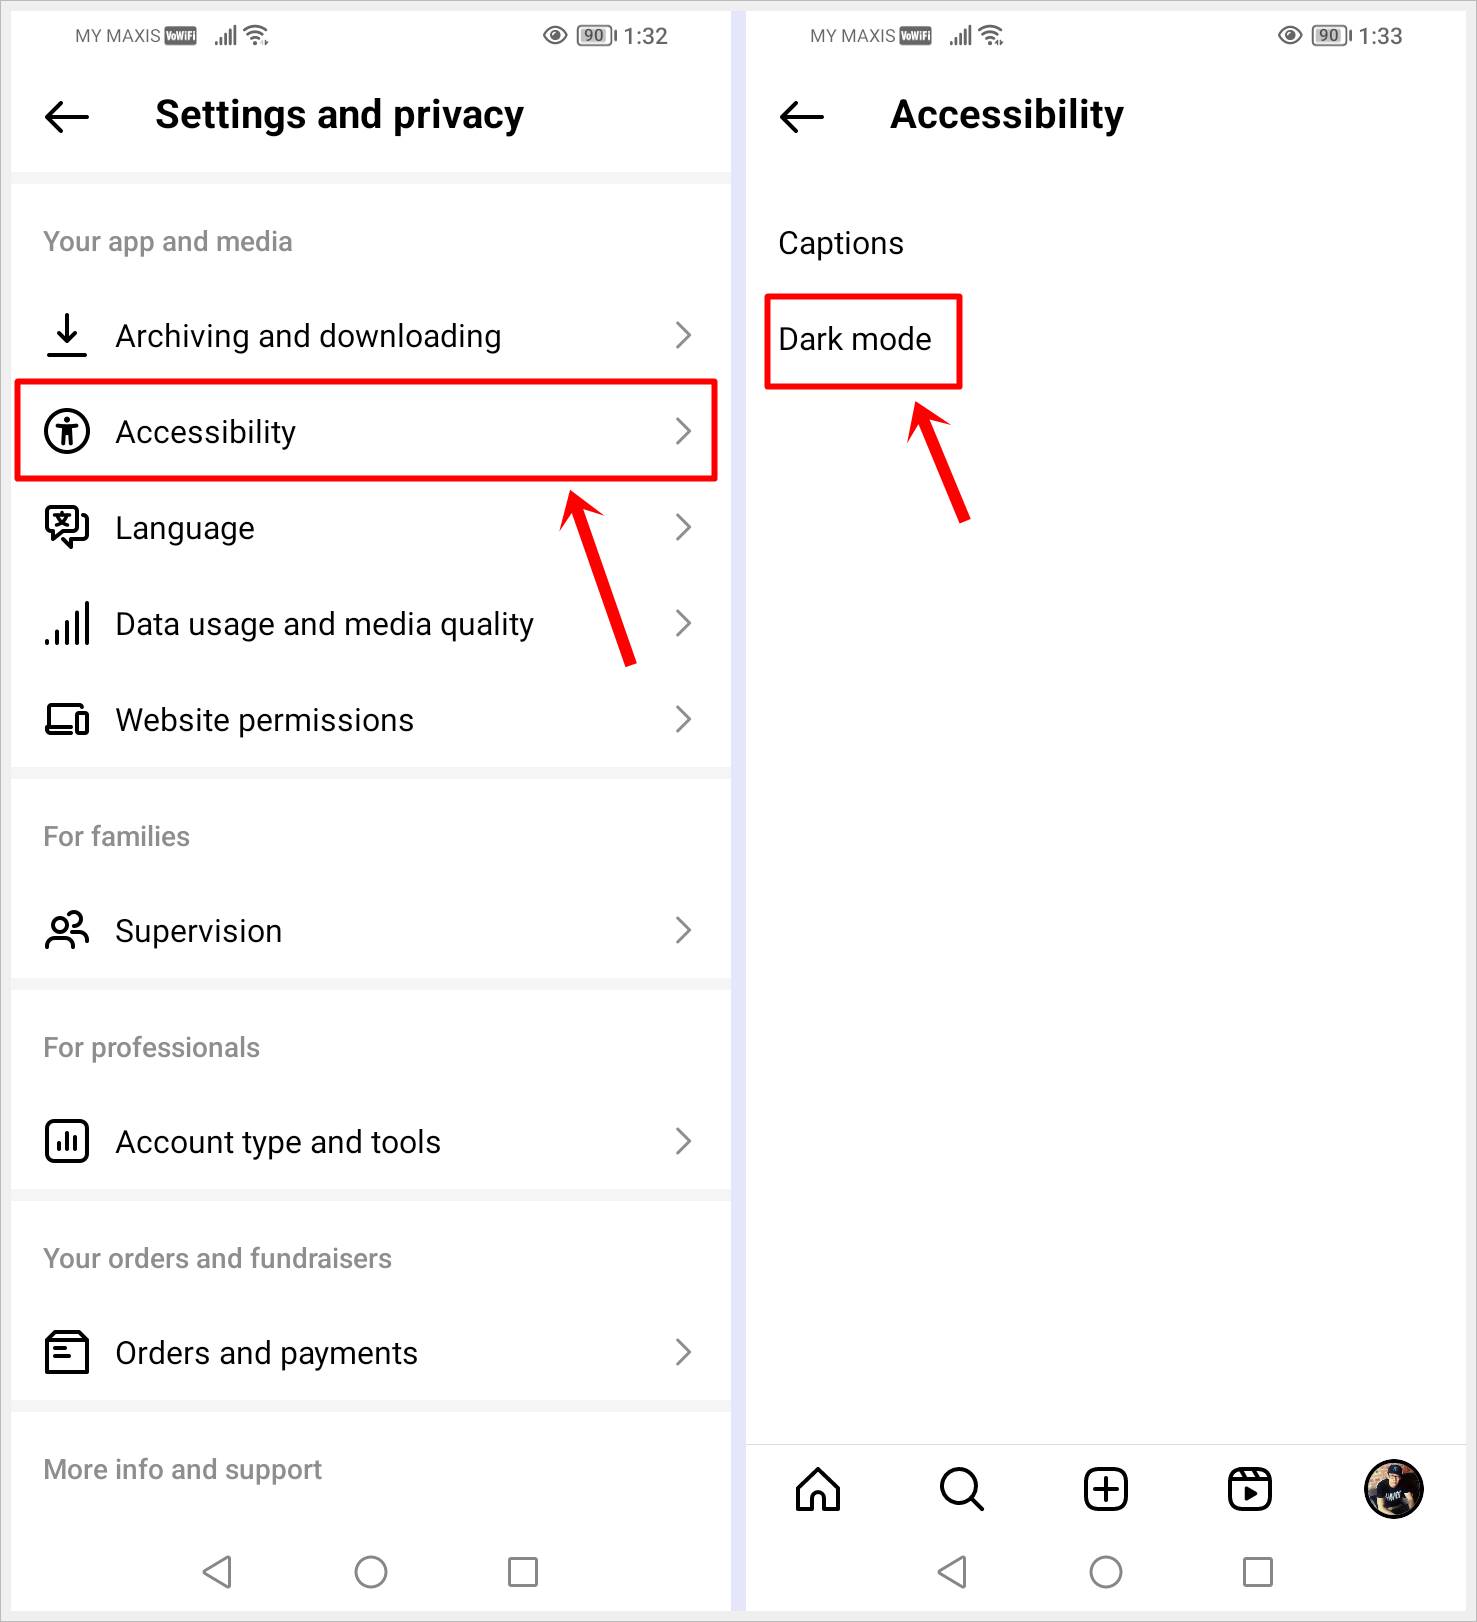 This image features two screenshots demonstrating how to activate dark mode on the Instagram Android mobile app.